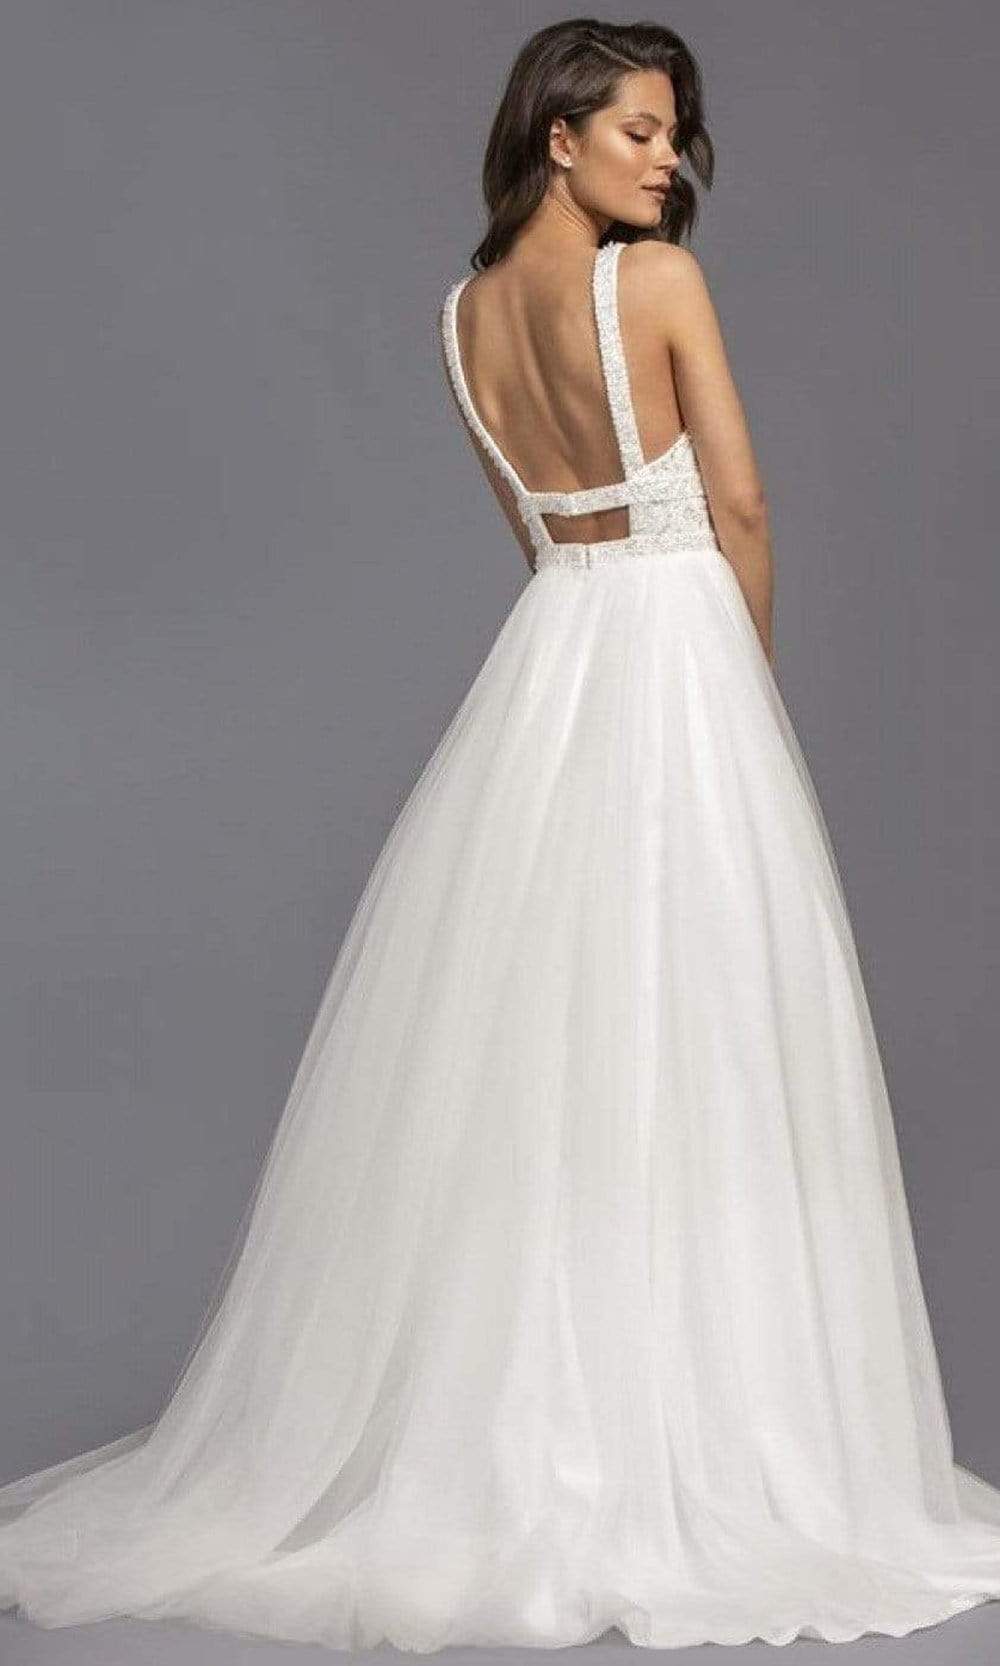 Aspeed Bridal - L2144 Halter Beaded Tulle A-Line Gown Wedding Dresses